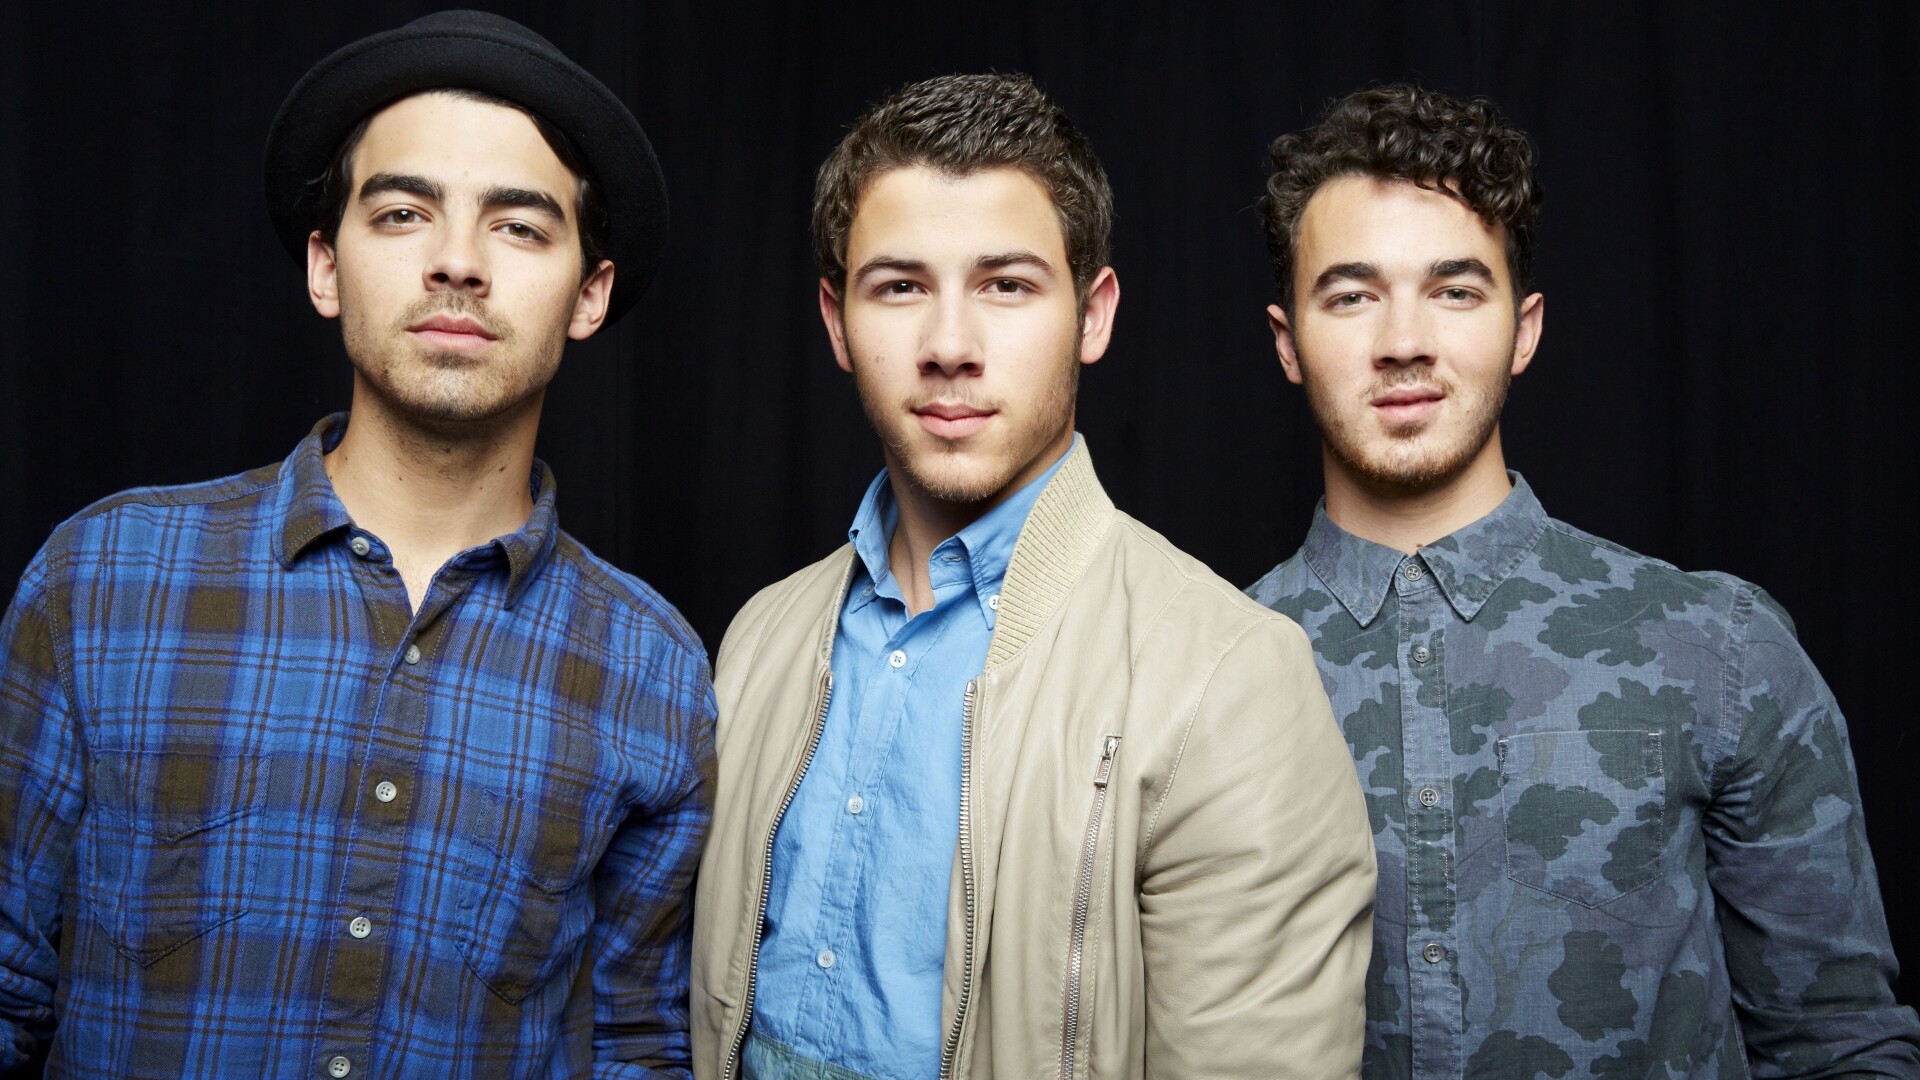 Jonas Brothers: "Keep It Real" was released as promotional single on September 6, 2009. 1920x1080 Full HD Background.